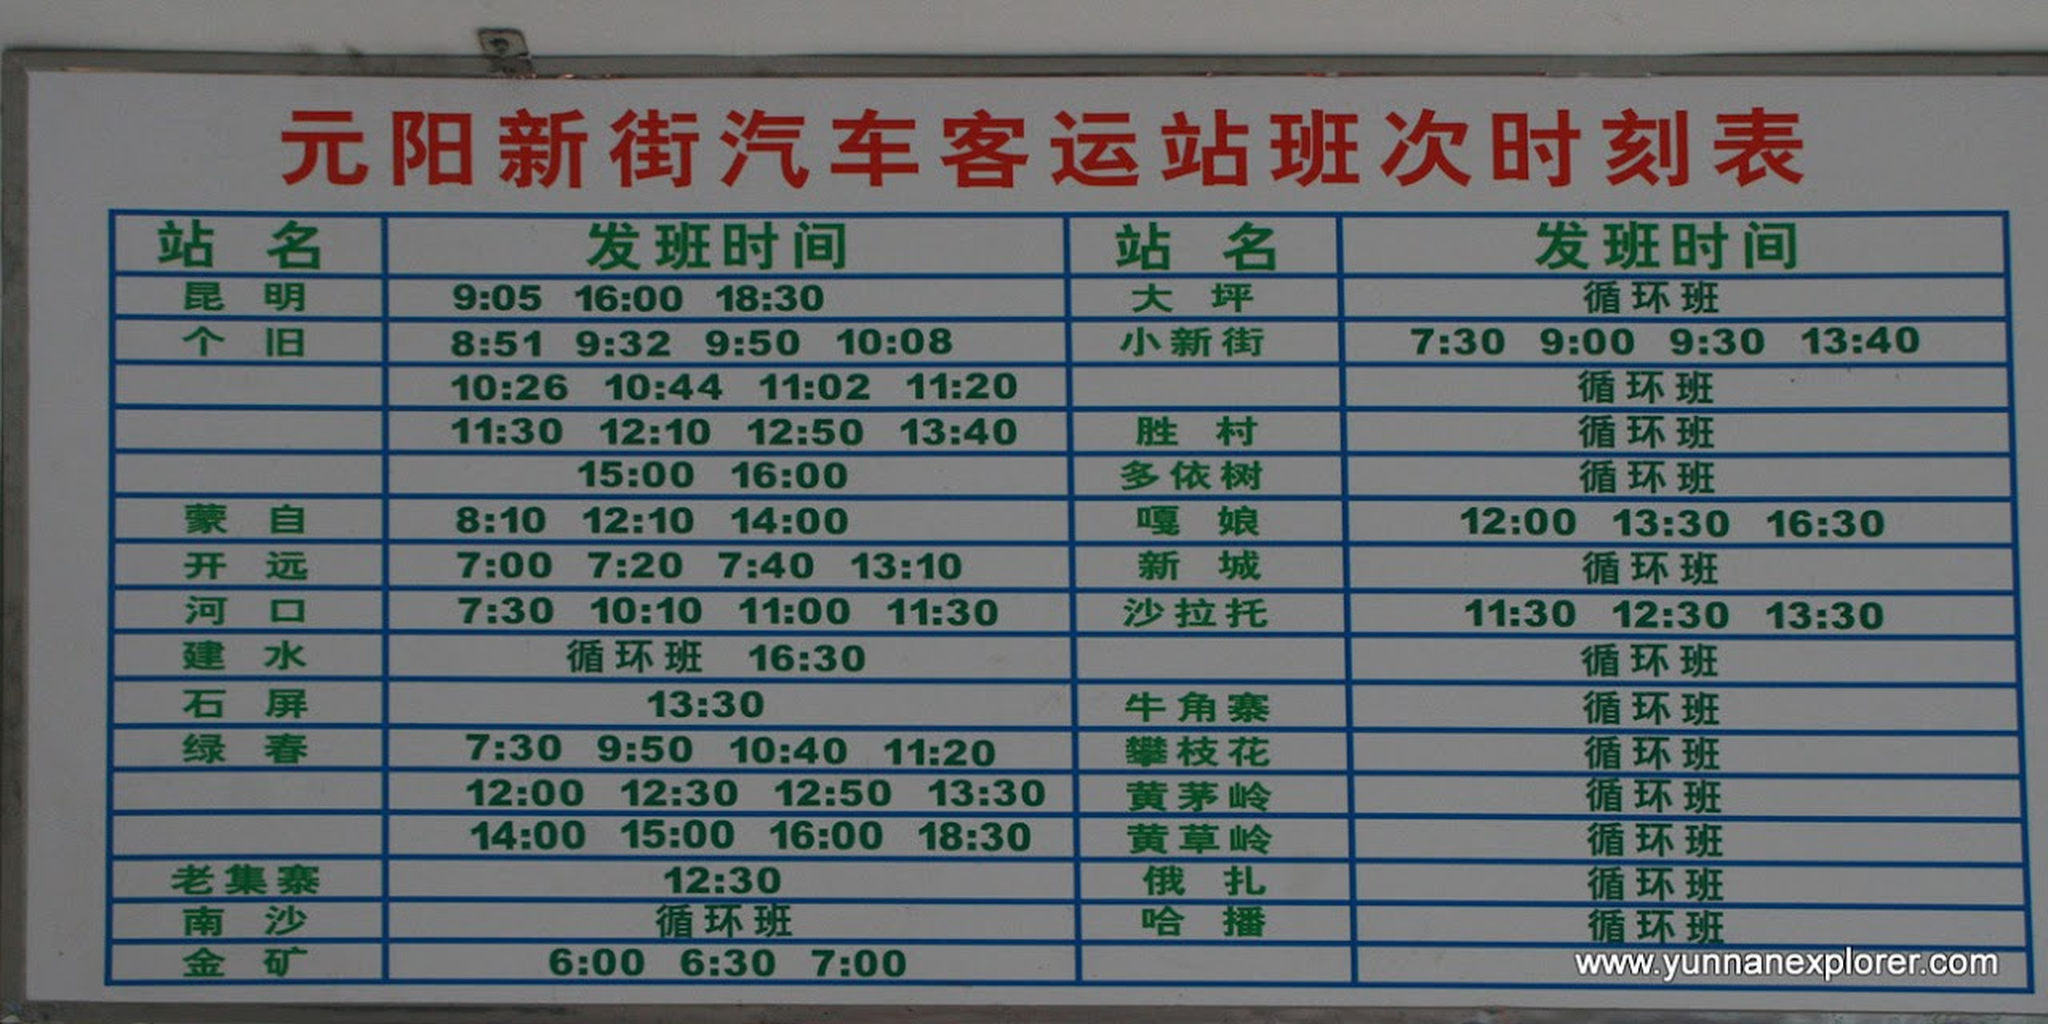 Picture: Busses to Kunming, Mengzi, Gejiu etc. For more connections go down to Nansha first. 